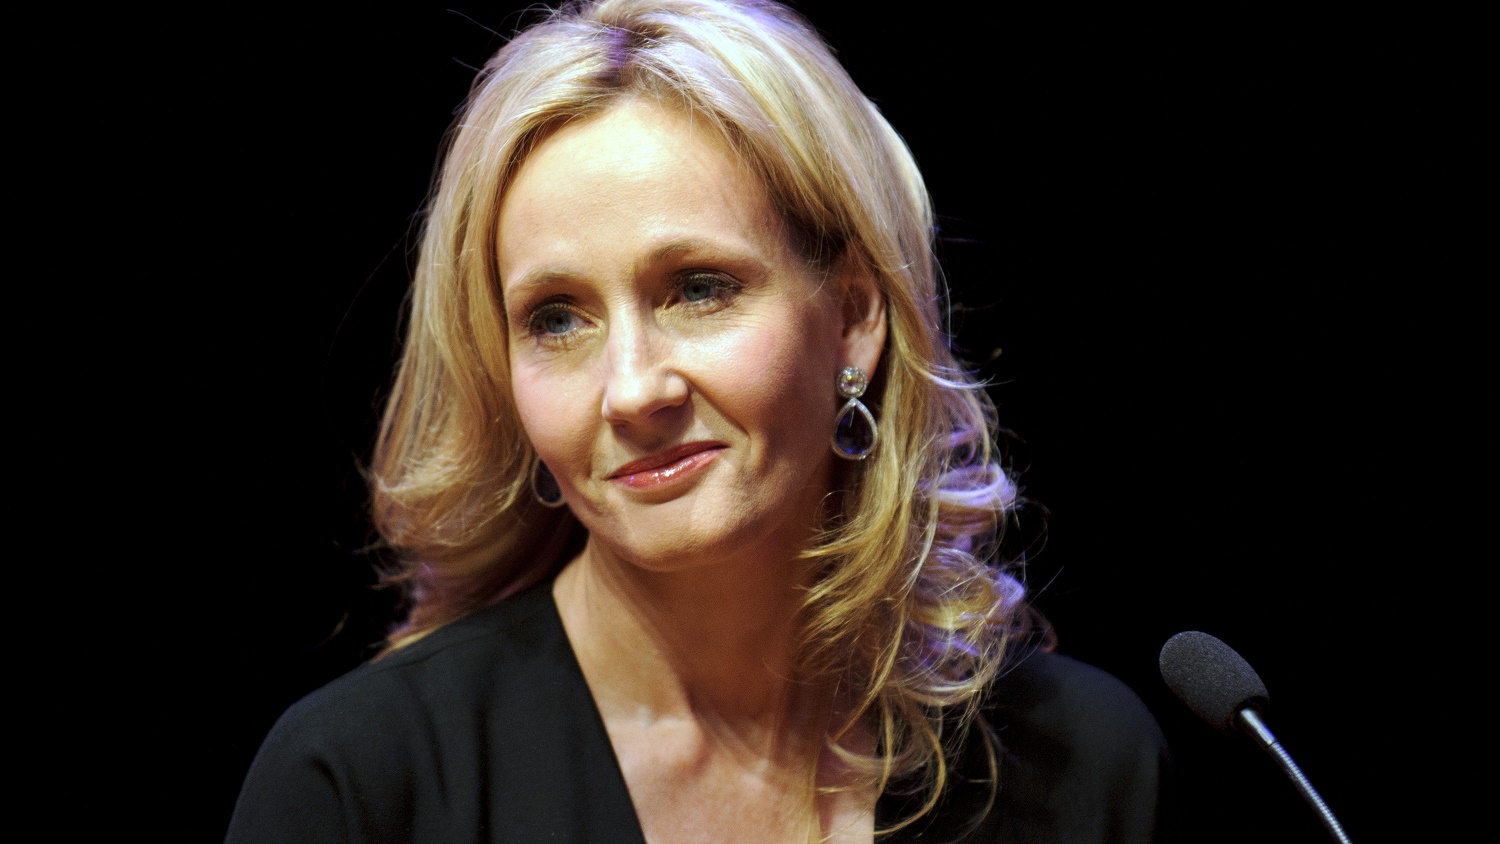 JK Rowling 'might have transitioned' if given the option when younger